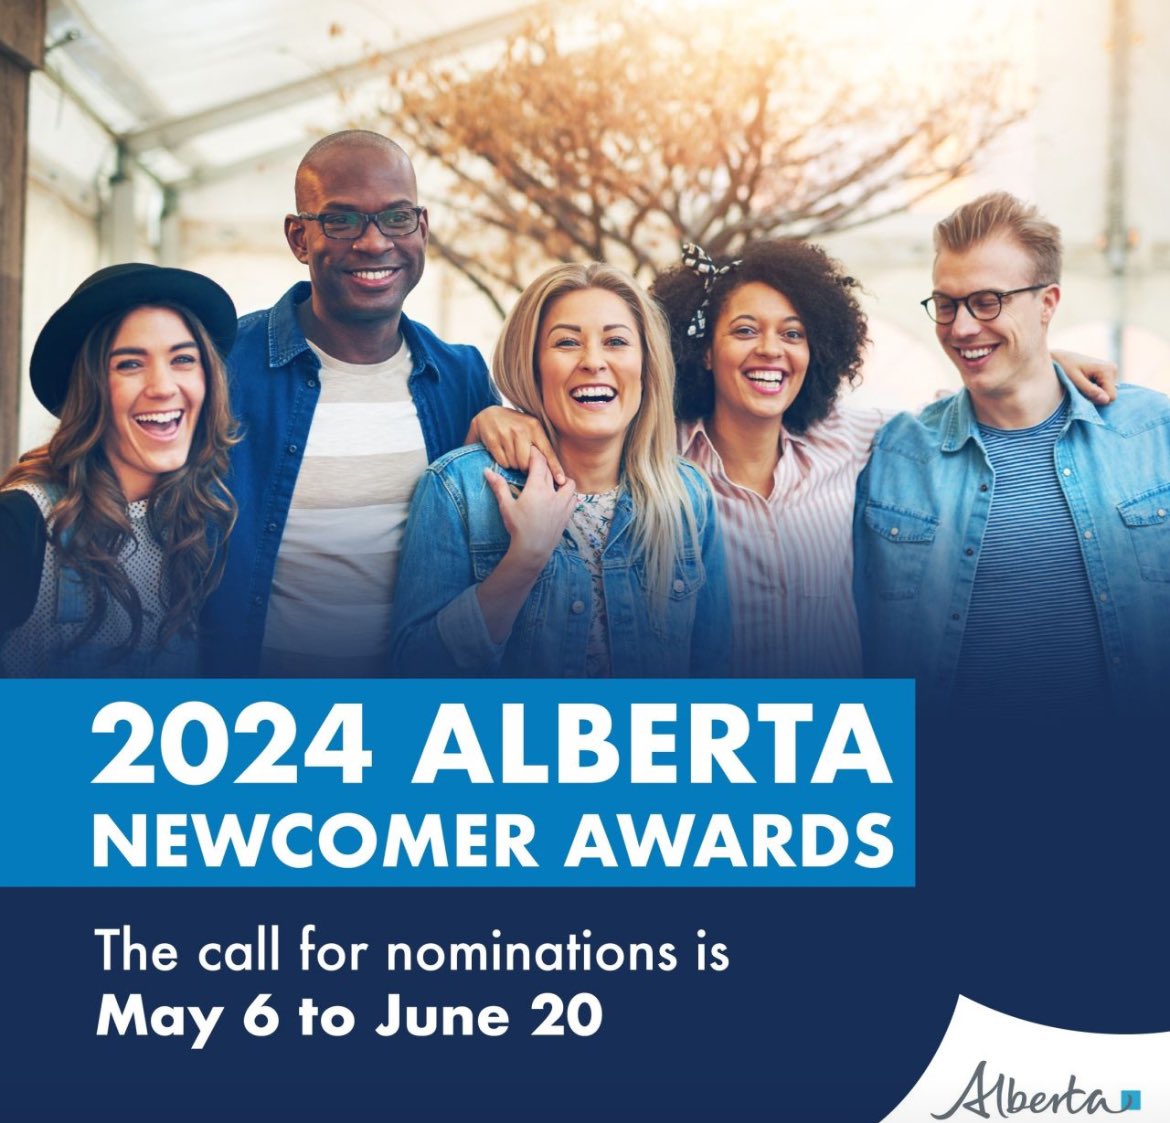 Alberta is home to many wonderful newcomers who exemplify the genuine spirit of Alberta . If you know someone who fits the bill, we are welcoming nominations for the Alberta Newcomer Awards until June 20th. For more details, head over to Alberta.ca/NewcomerAwards